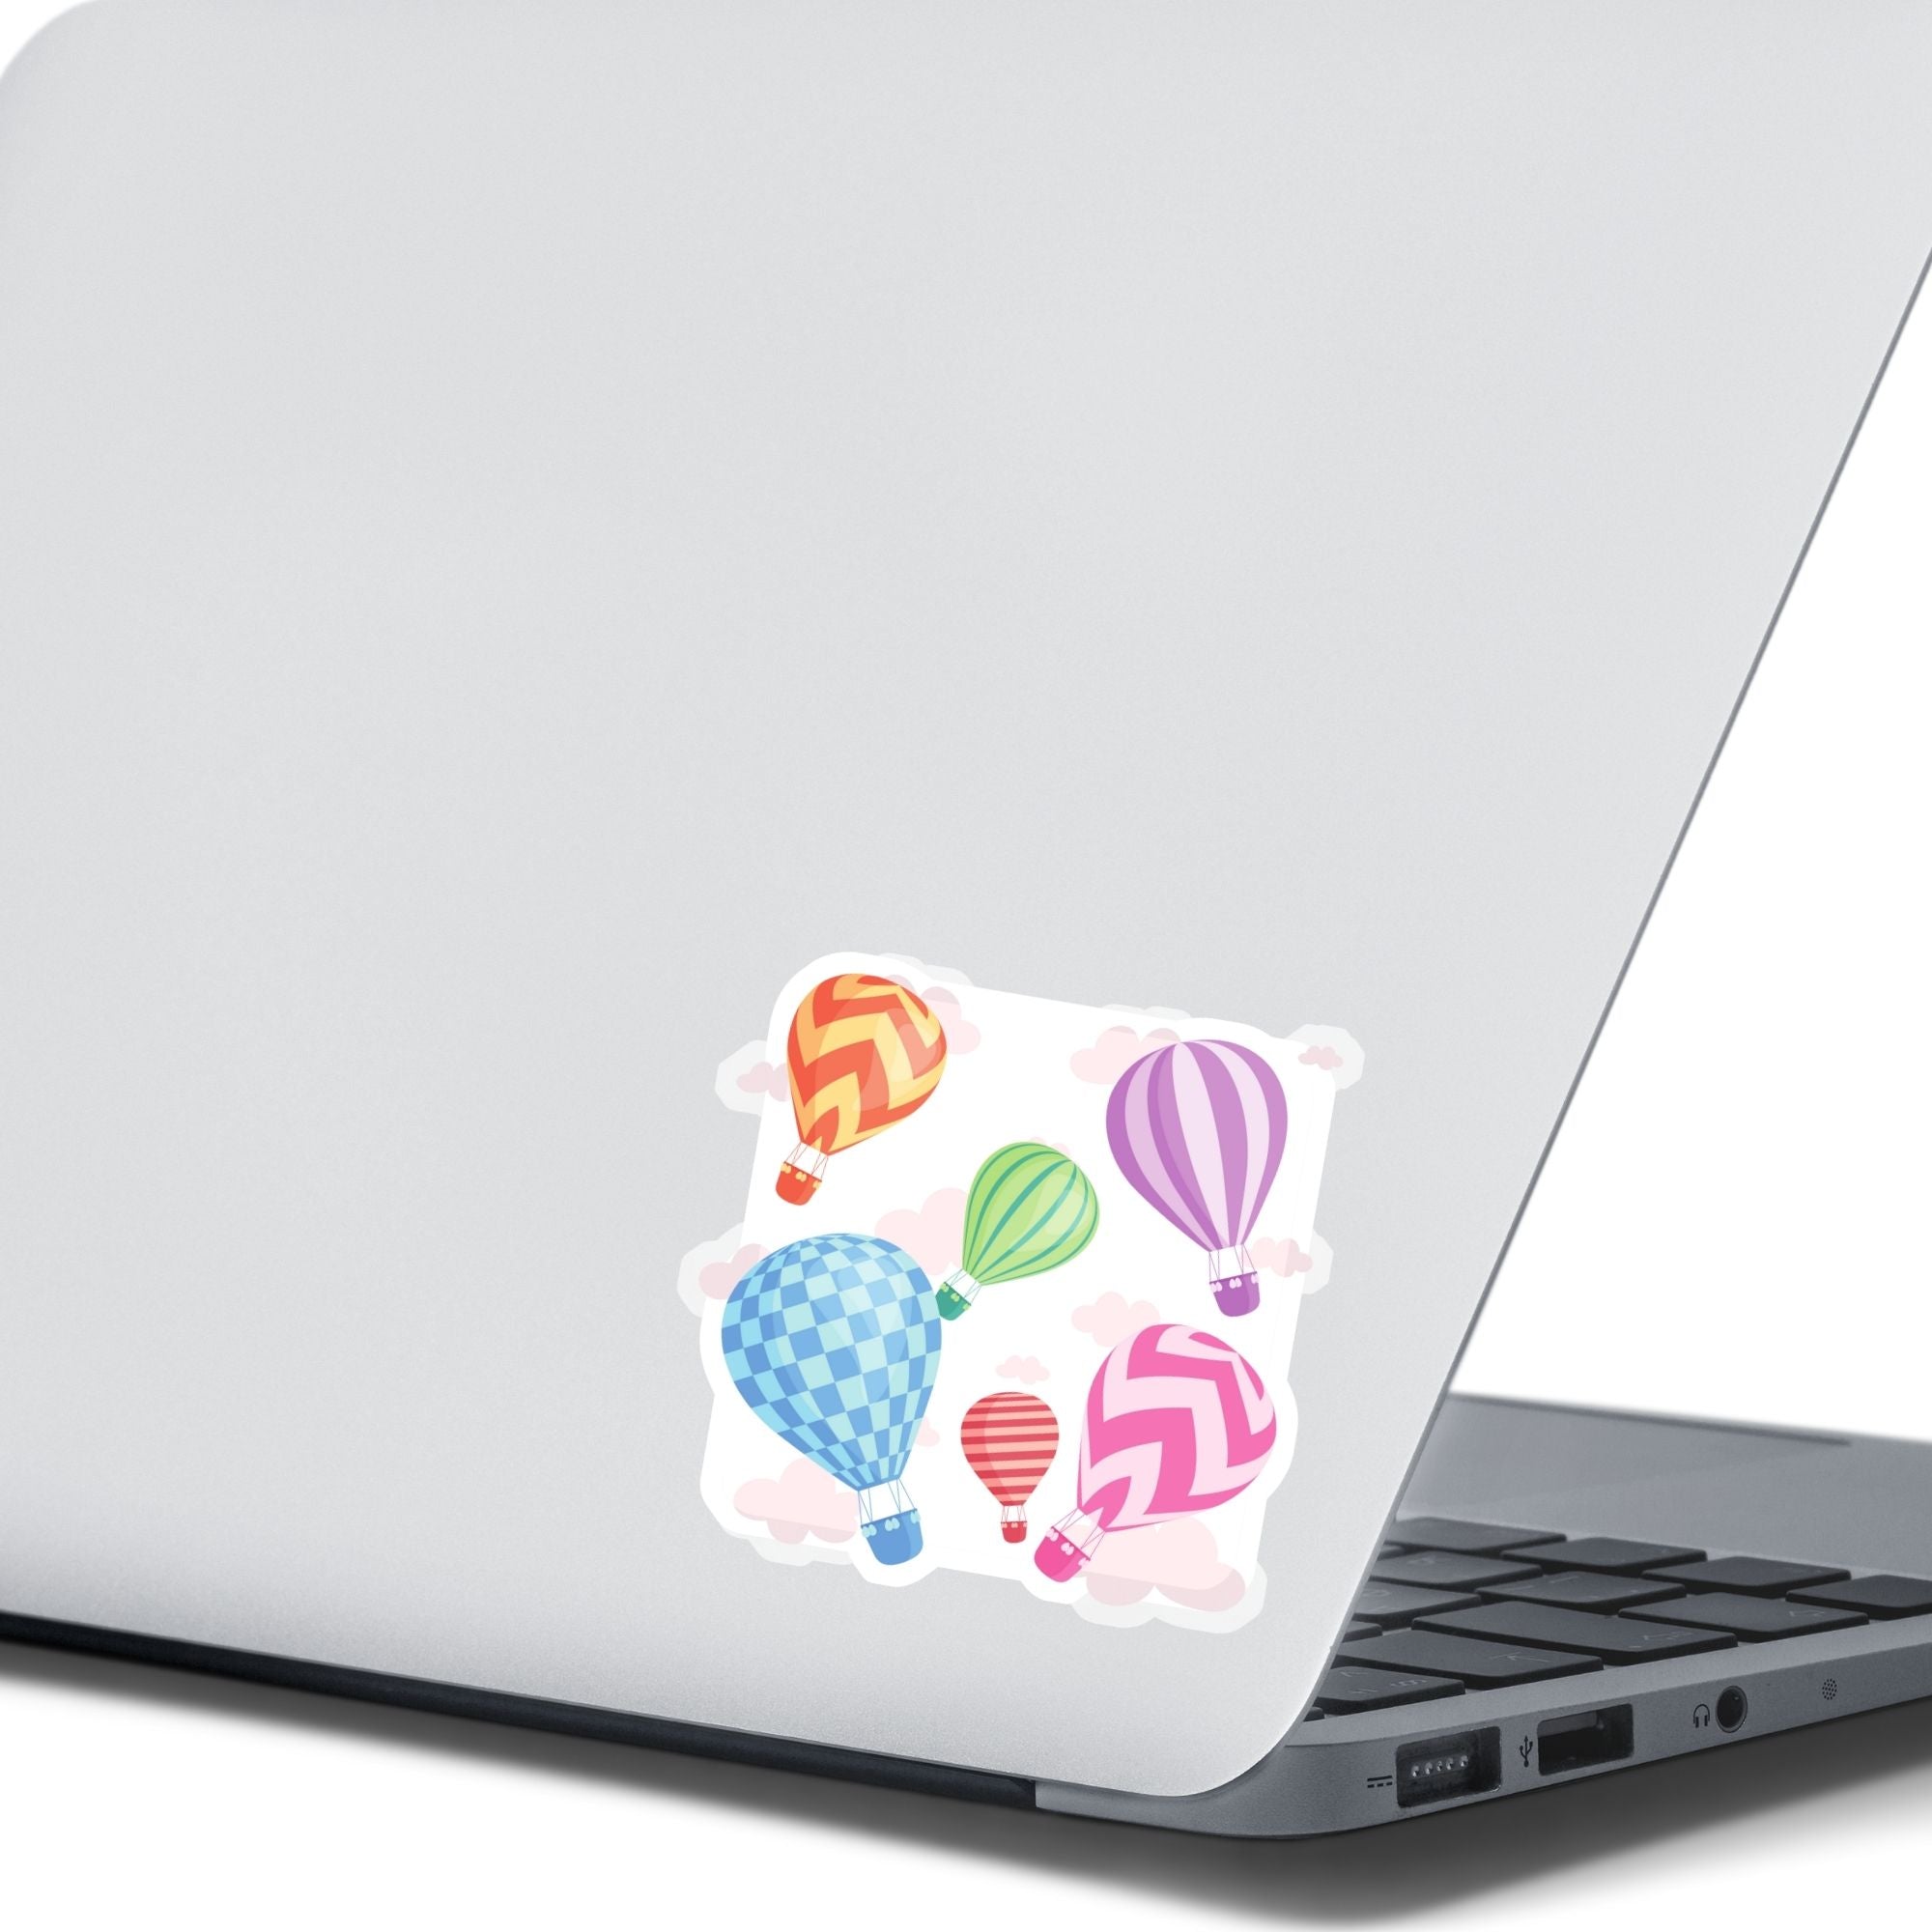 Float away on a colorful hot air balloon! This individual die-cut hot air balloon sticker has six, yes six, different hot air balloons on a background of clouds. This image shows the hot air balloon sticker on the back of an open laptop.